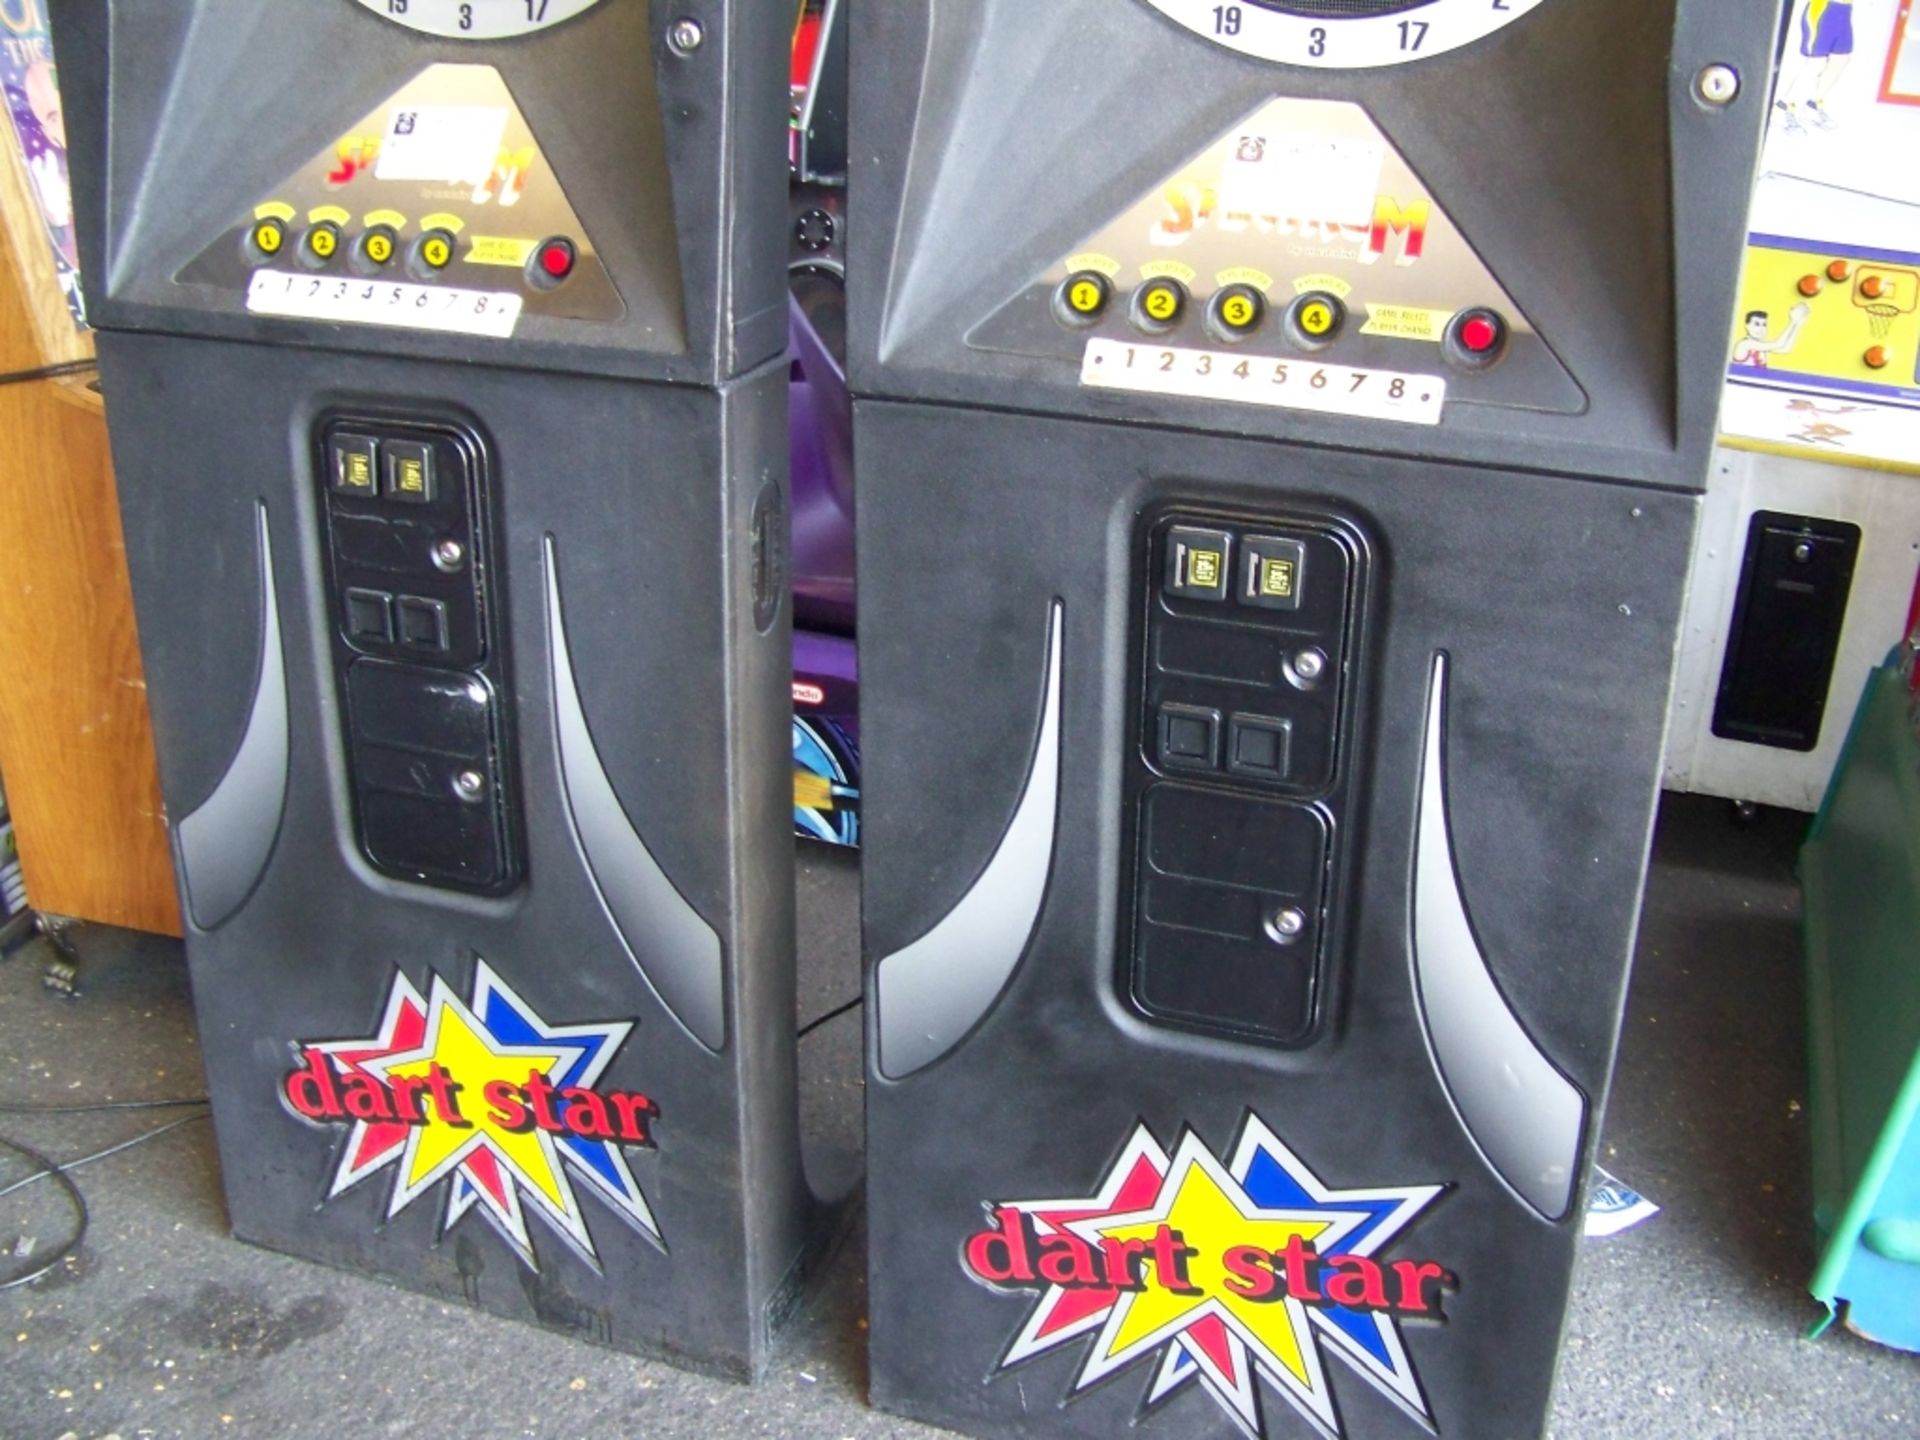 SPECTRUM DART STAR SOFT TIP COIN OP LCD UPGRADE Item is in used condition. Evidence of wear and